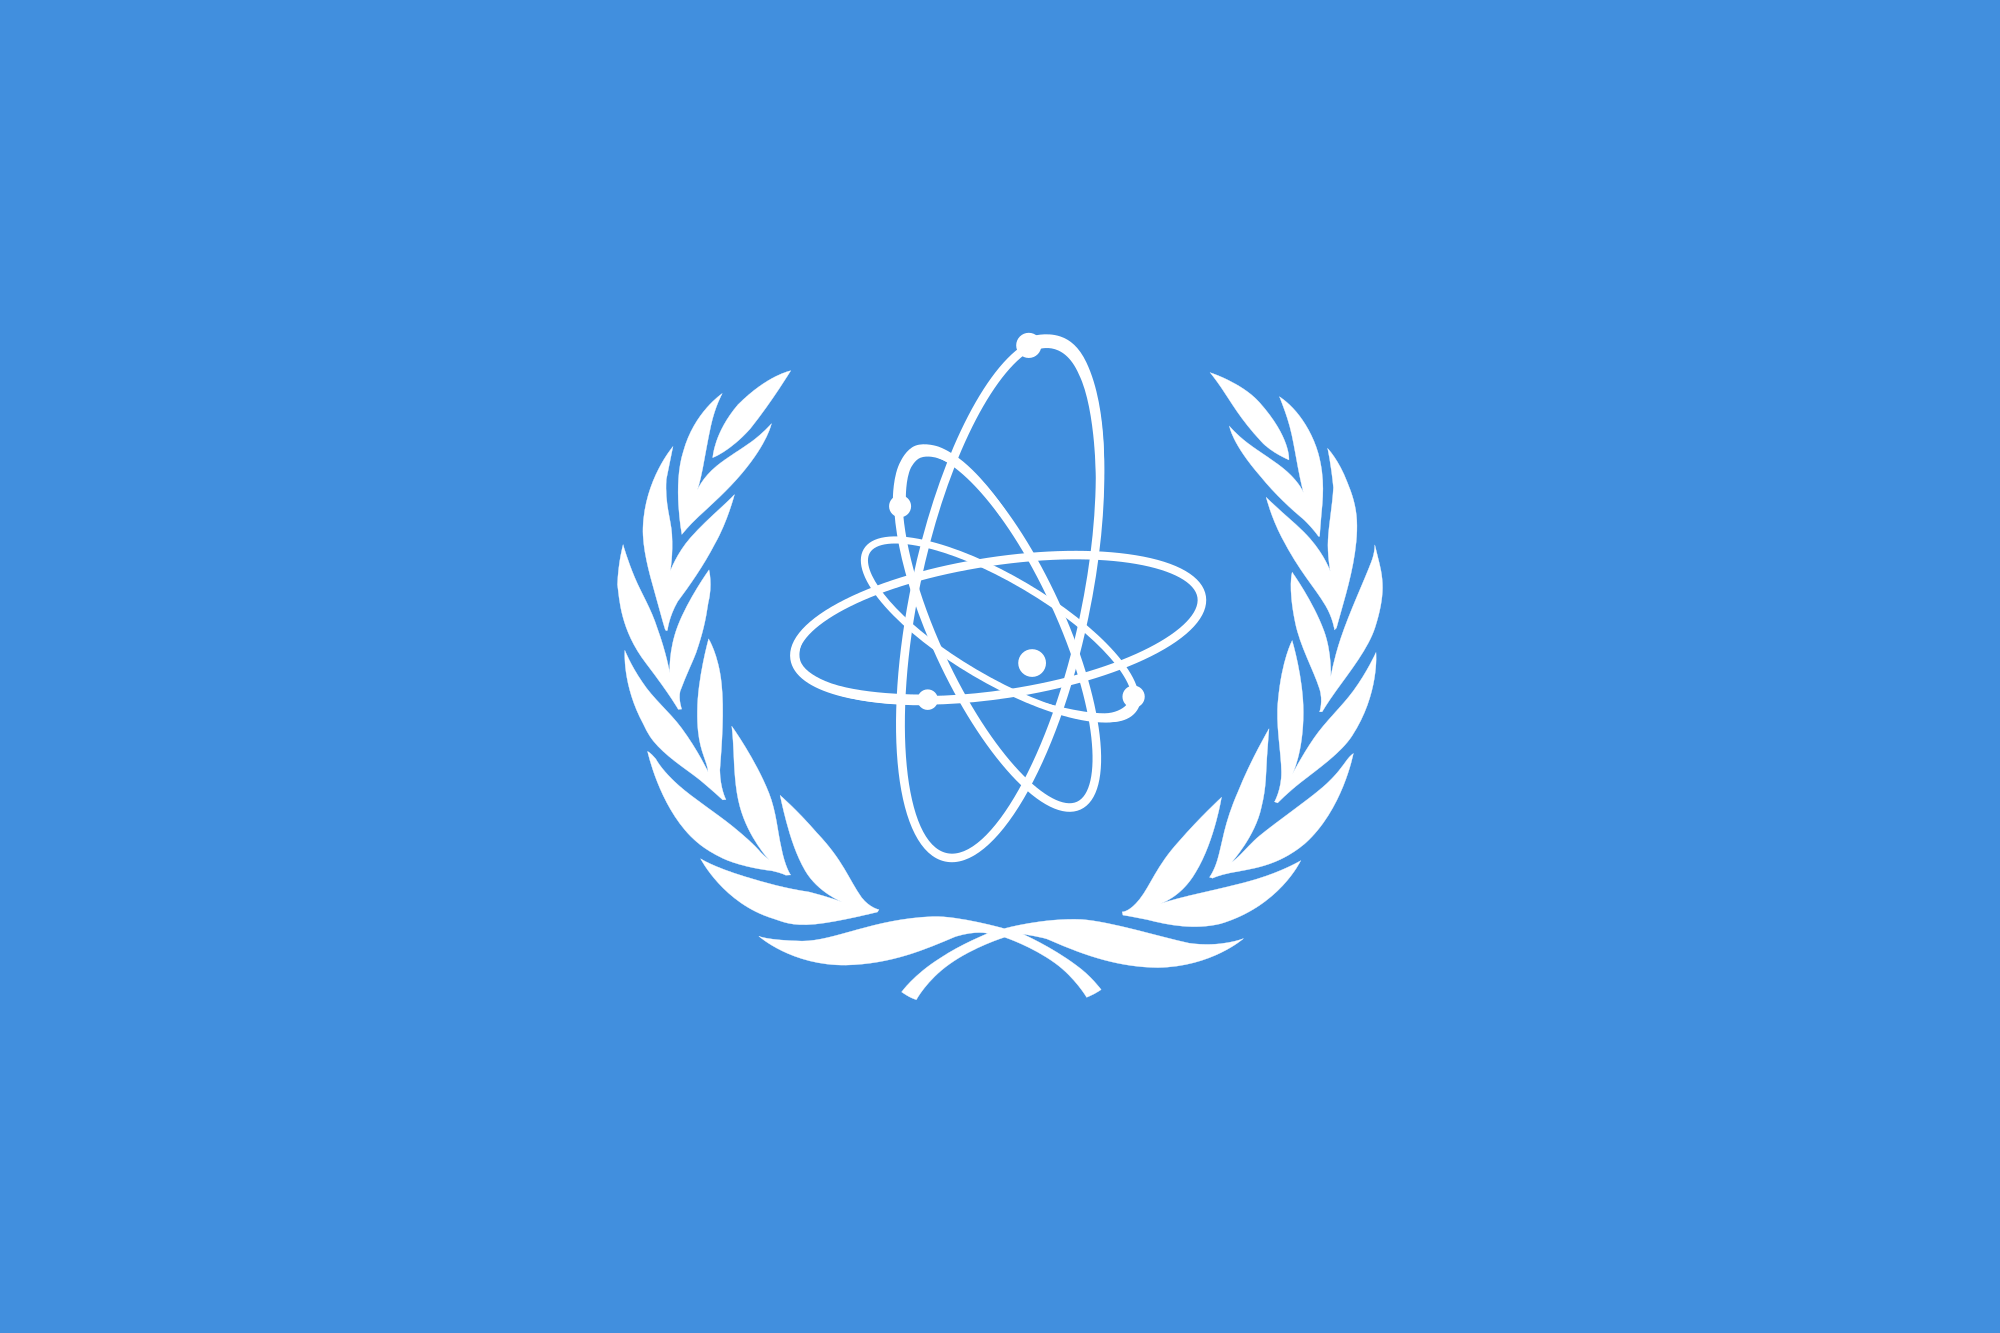 Flag of International Atomic Energy Agency with blue background, atomic particle surrounded by oak leaf branches